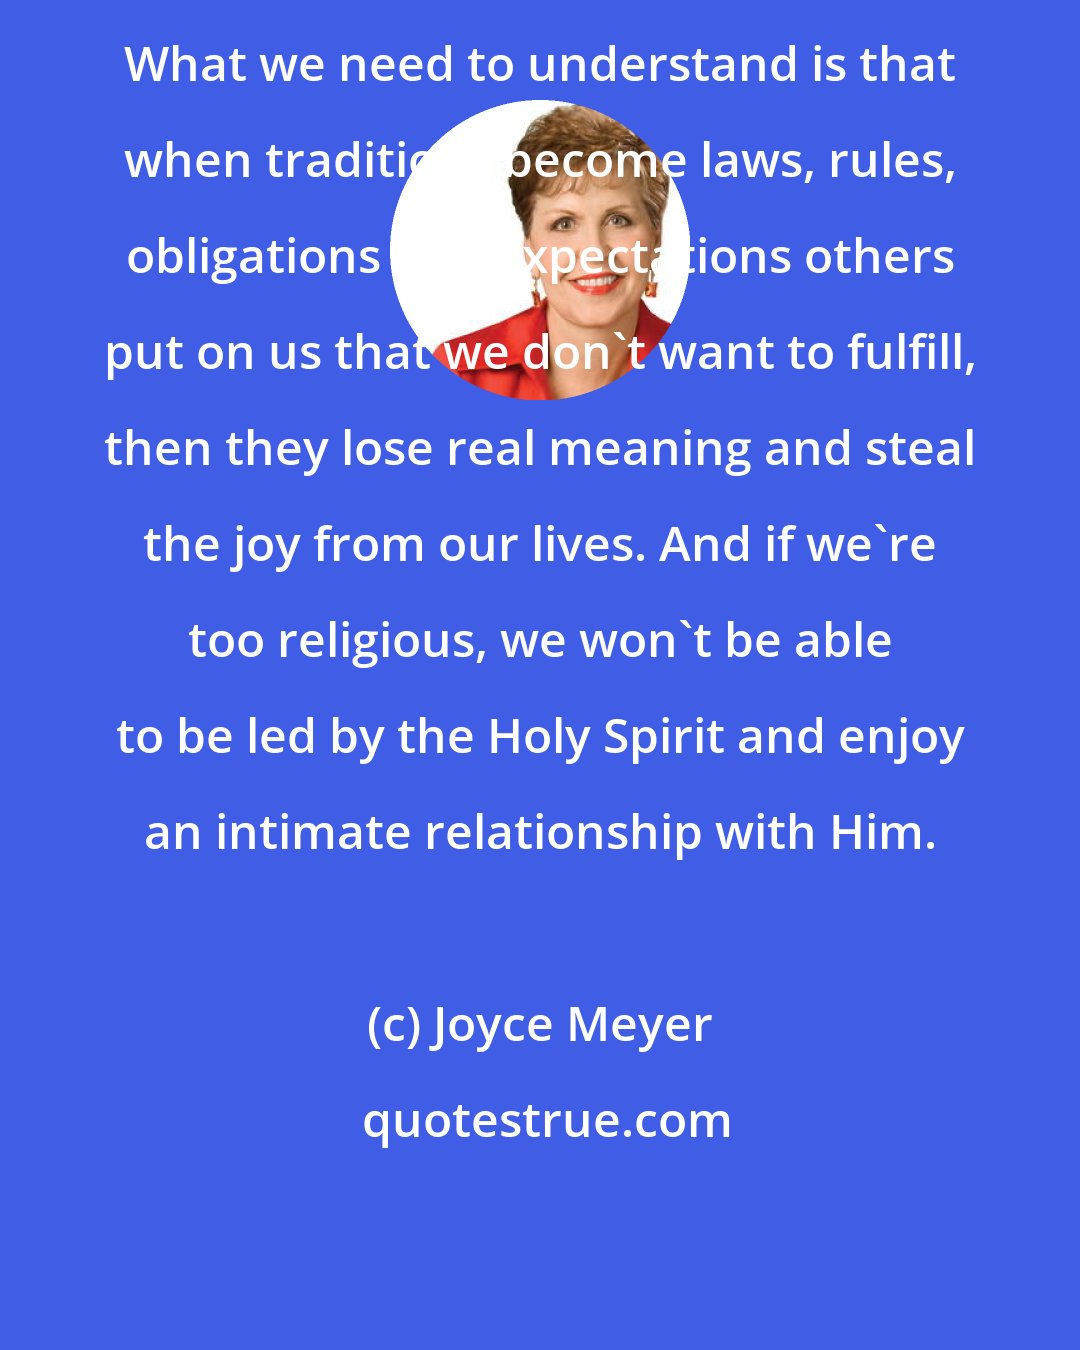 Joyce Meyer: What we need to understand is that when traditions become laws, rules, obligations and expectations others put on us that we don't want to fulfill, then they lose real meaning and steal the joy from our lives. And if we're too religious, we won't be able to be led by the Holy Spirit and enjoy an intimate relationship with Him.